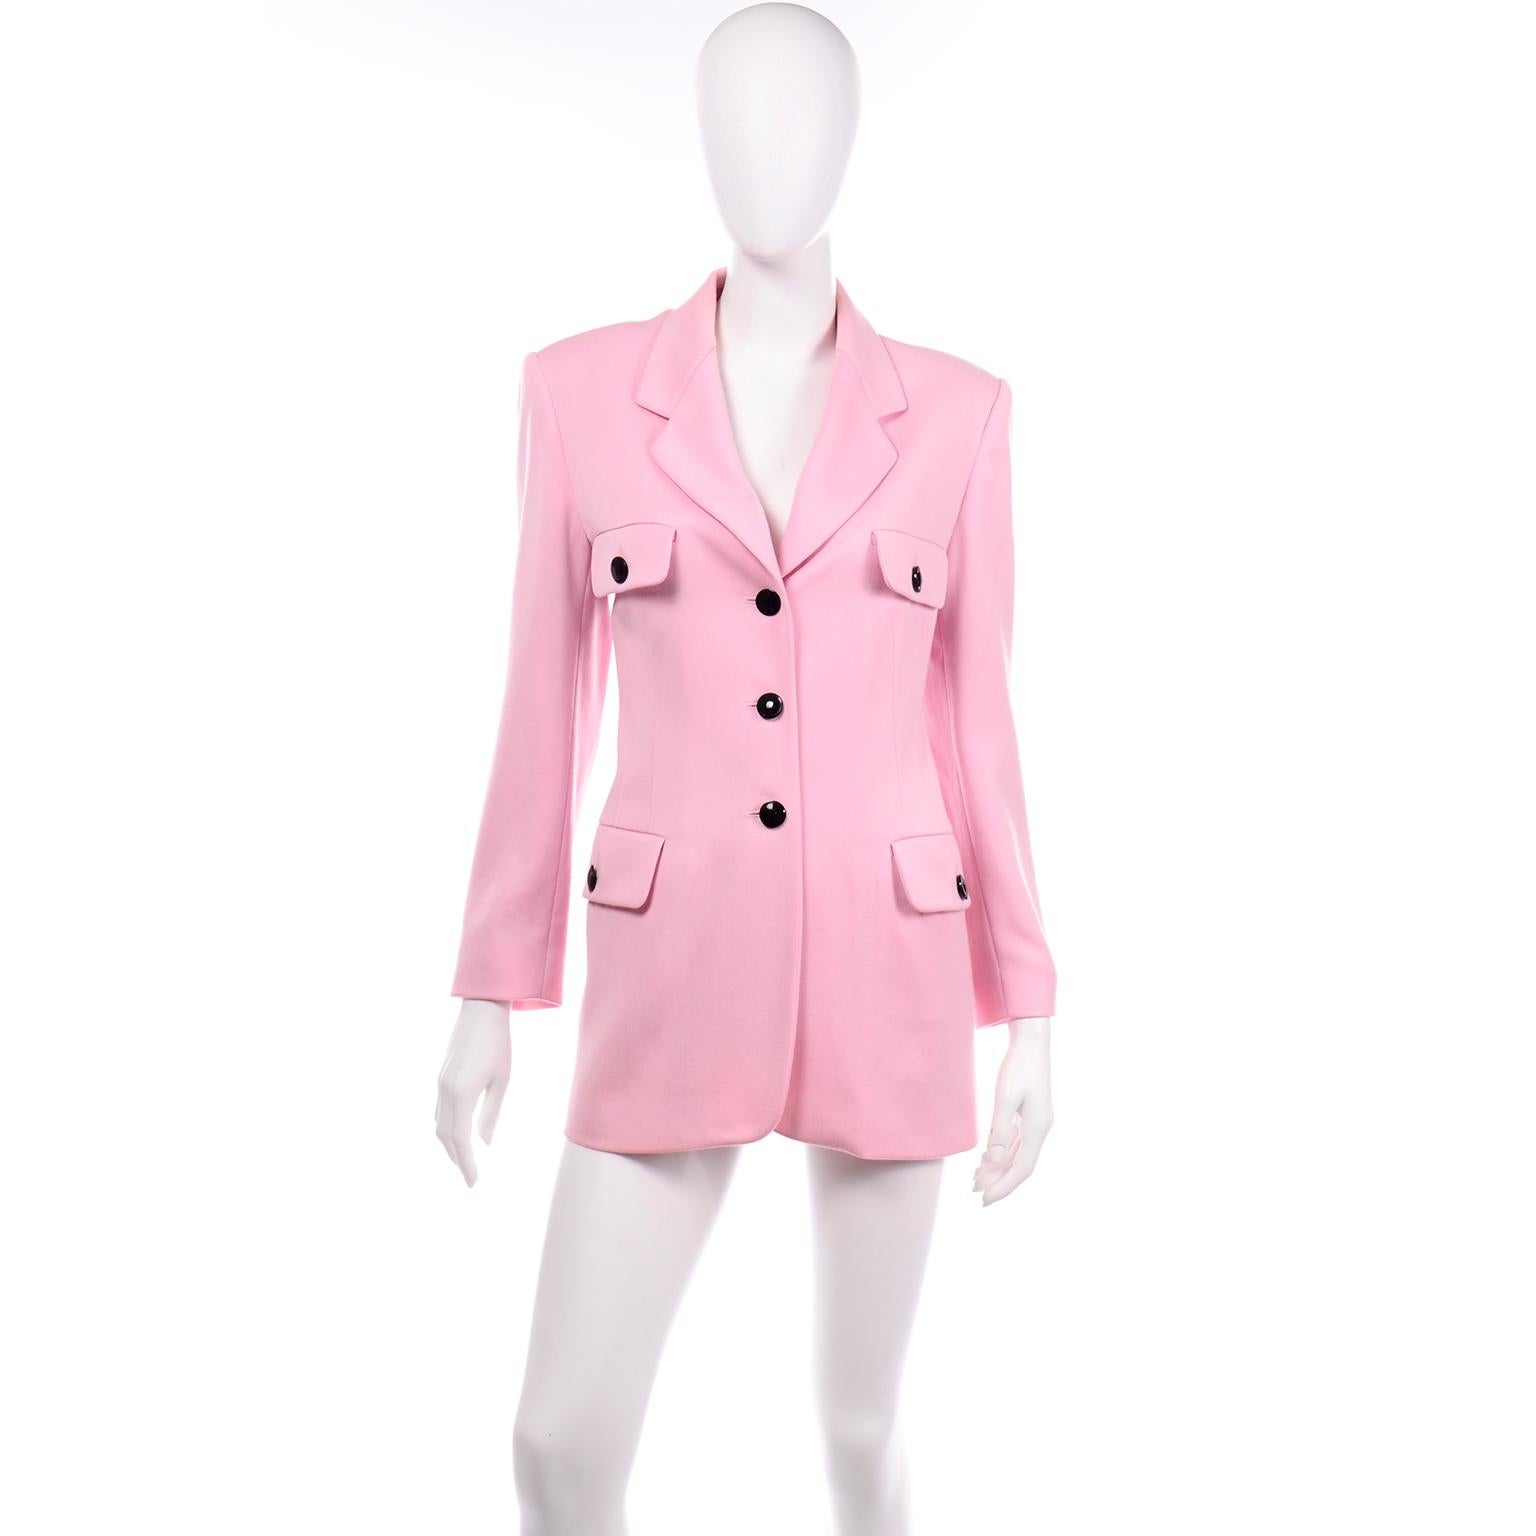 This absolutely beautiful vintage pink wool longline blazer was made designed by Margaretha Ley for Escada in the 1980's. This lovely jacket will carry you through the Spring and Summer! We love the contrast of the light pink wool with the black